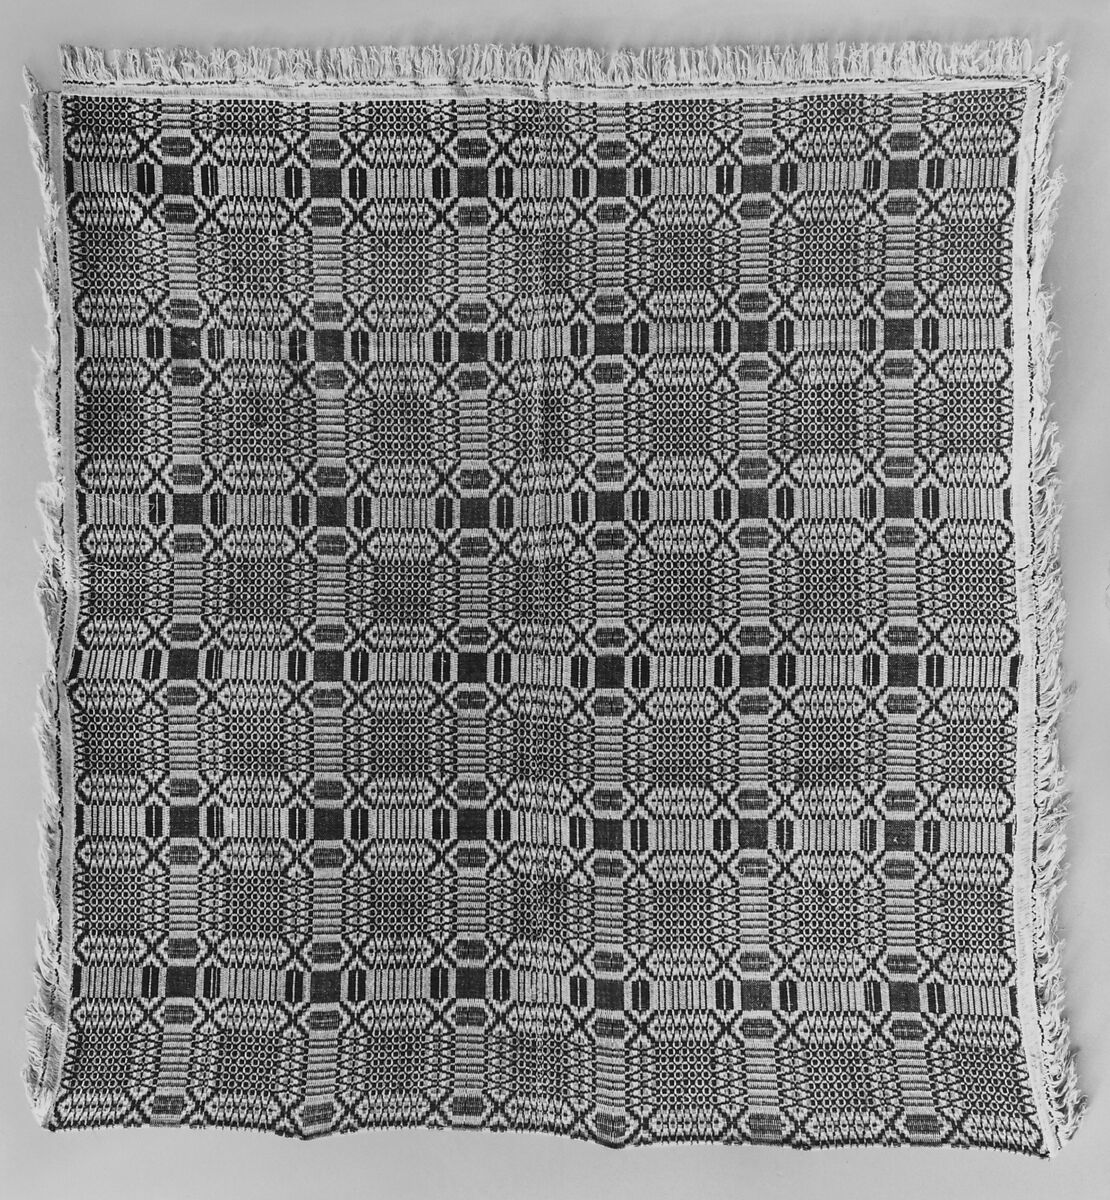 Coverlet, Saint Ann's Robe or Governor's Garden pattern, Wool and cotton, woven, American 